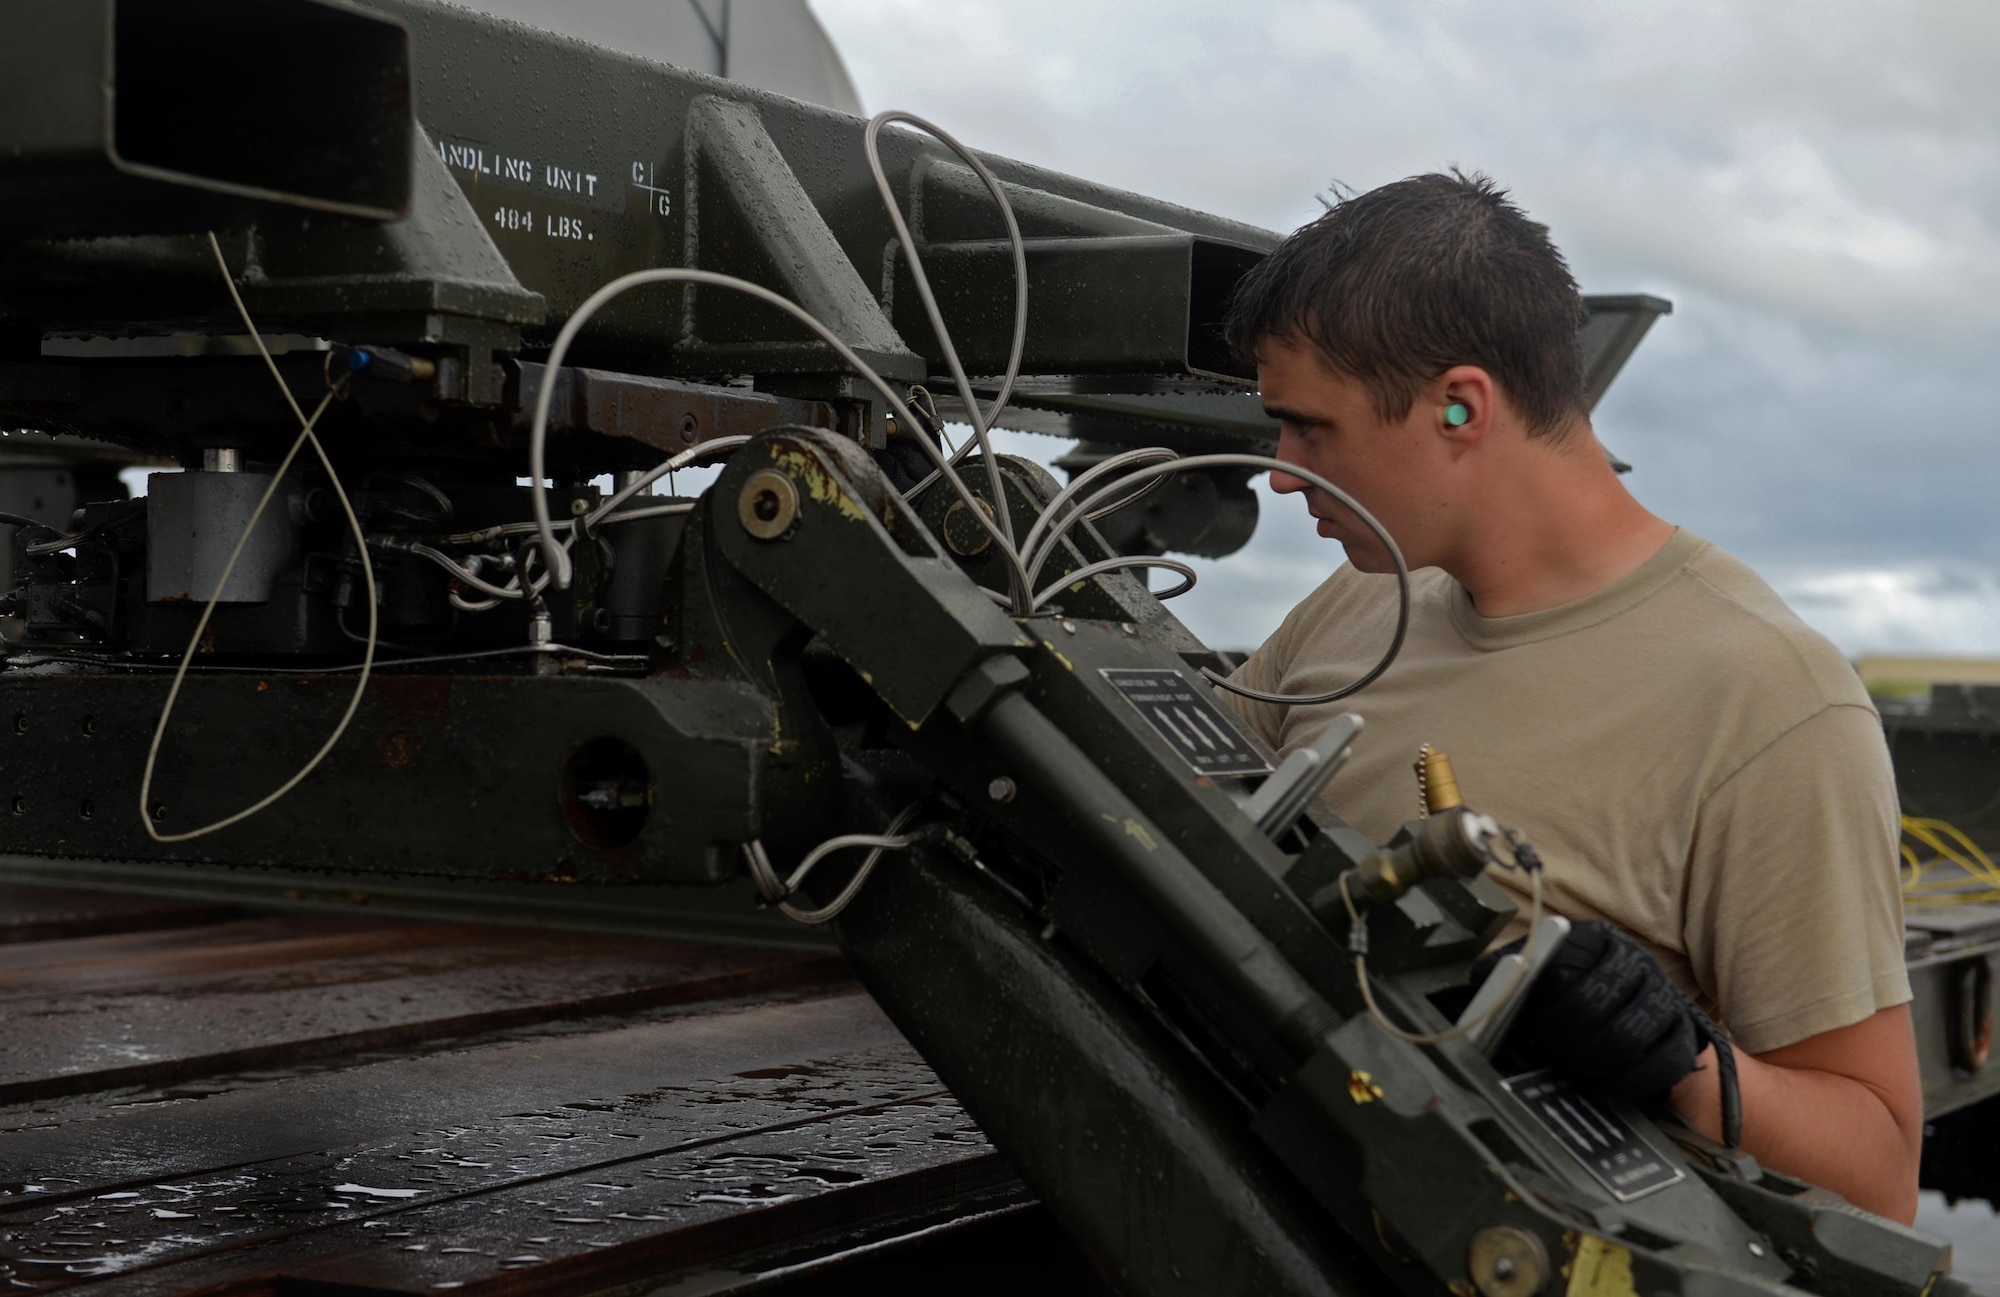 Airman 1st Class Michael O’Donnell, 36th  Expeditionary Aircraft Maintenance Squadron weapons load crew team member, operates a MHU-83 bomb lift truck during a munitions loading exercise July 13, 2016, at Andersen Air Force Base, Guam.  Airmen practiced loading an entire B-52 Stratofortress with 12 AGM-158 Joint Air-to-Surface Standoff Missiles and eight AGM-158 Joint Air-to-Surface Standoff Missiles. (U.S. Air Force photo by Airman 1st Class Alexa Ann Henderson/Released)